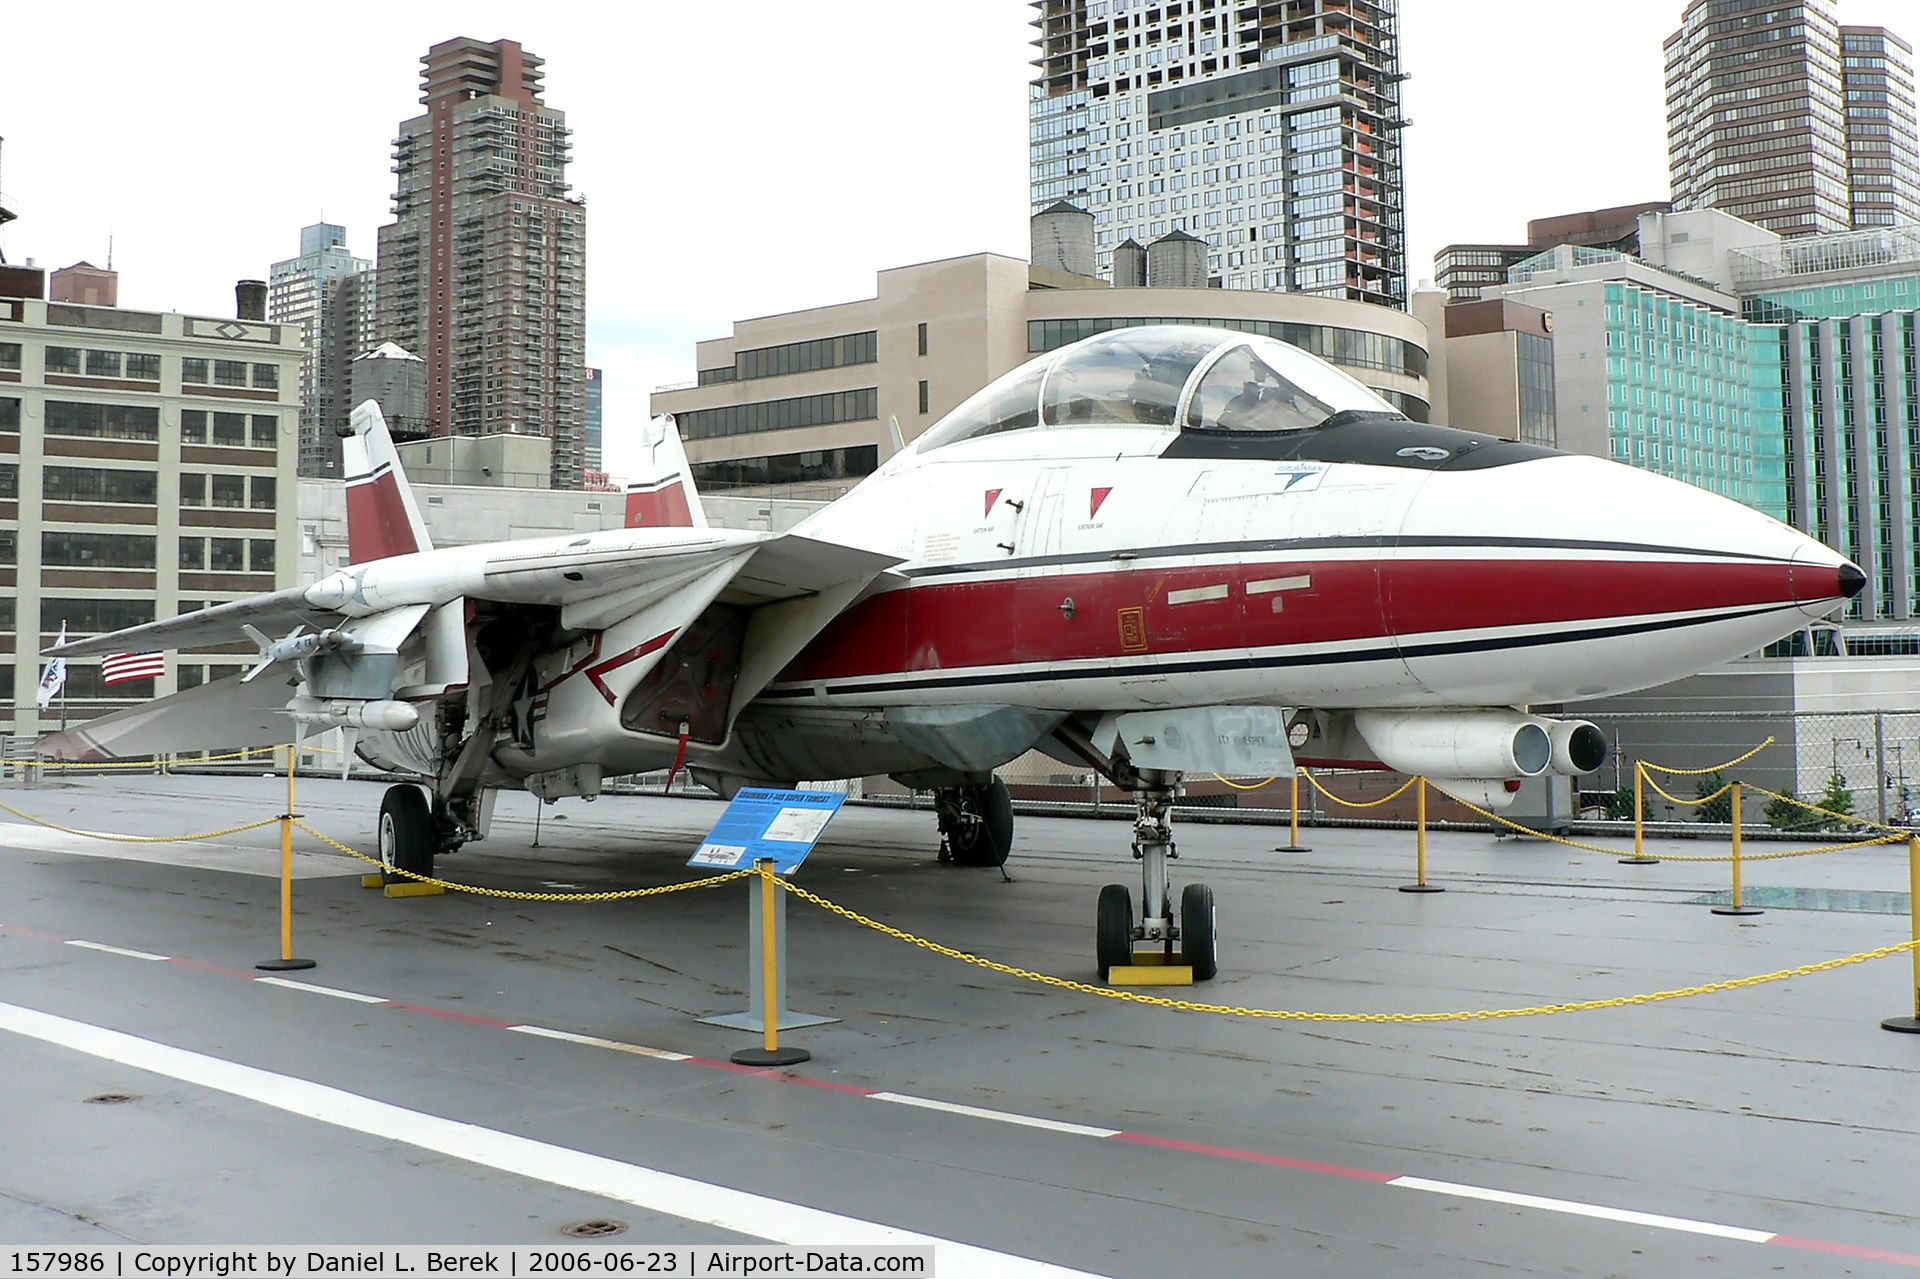 157986, Grumman YF-14A Tomcat C/N 7, On loan from the National Museum of Naval Aviation, this YF-14 Tomcat prototype currently resides on the USS Intrepid.